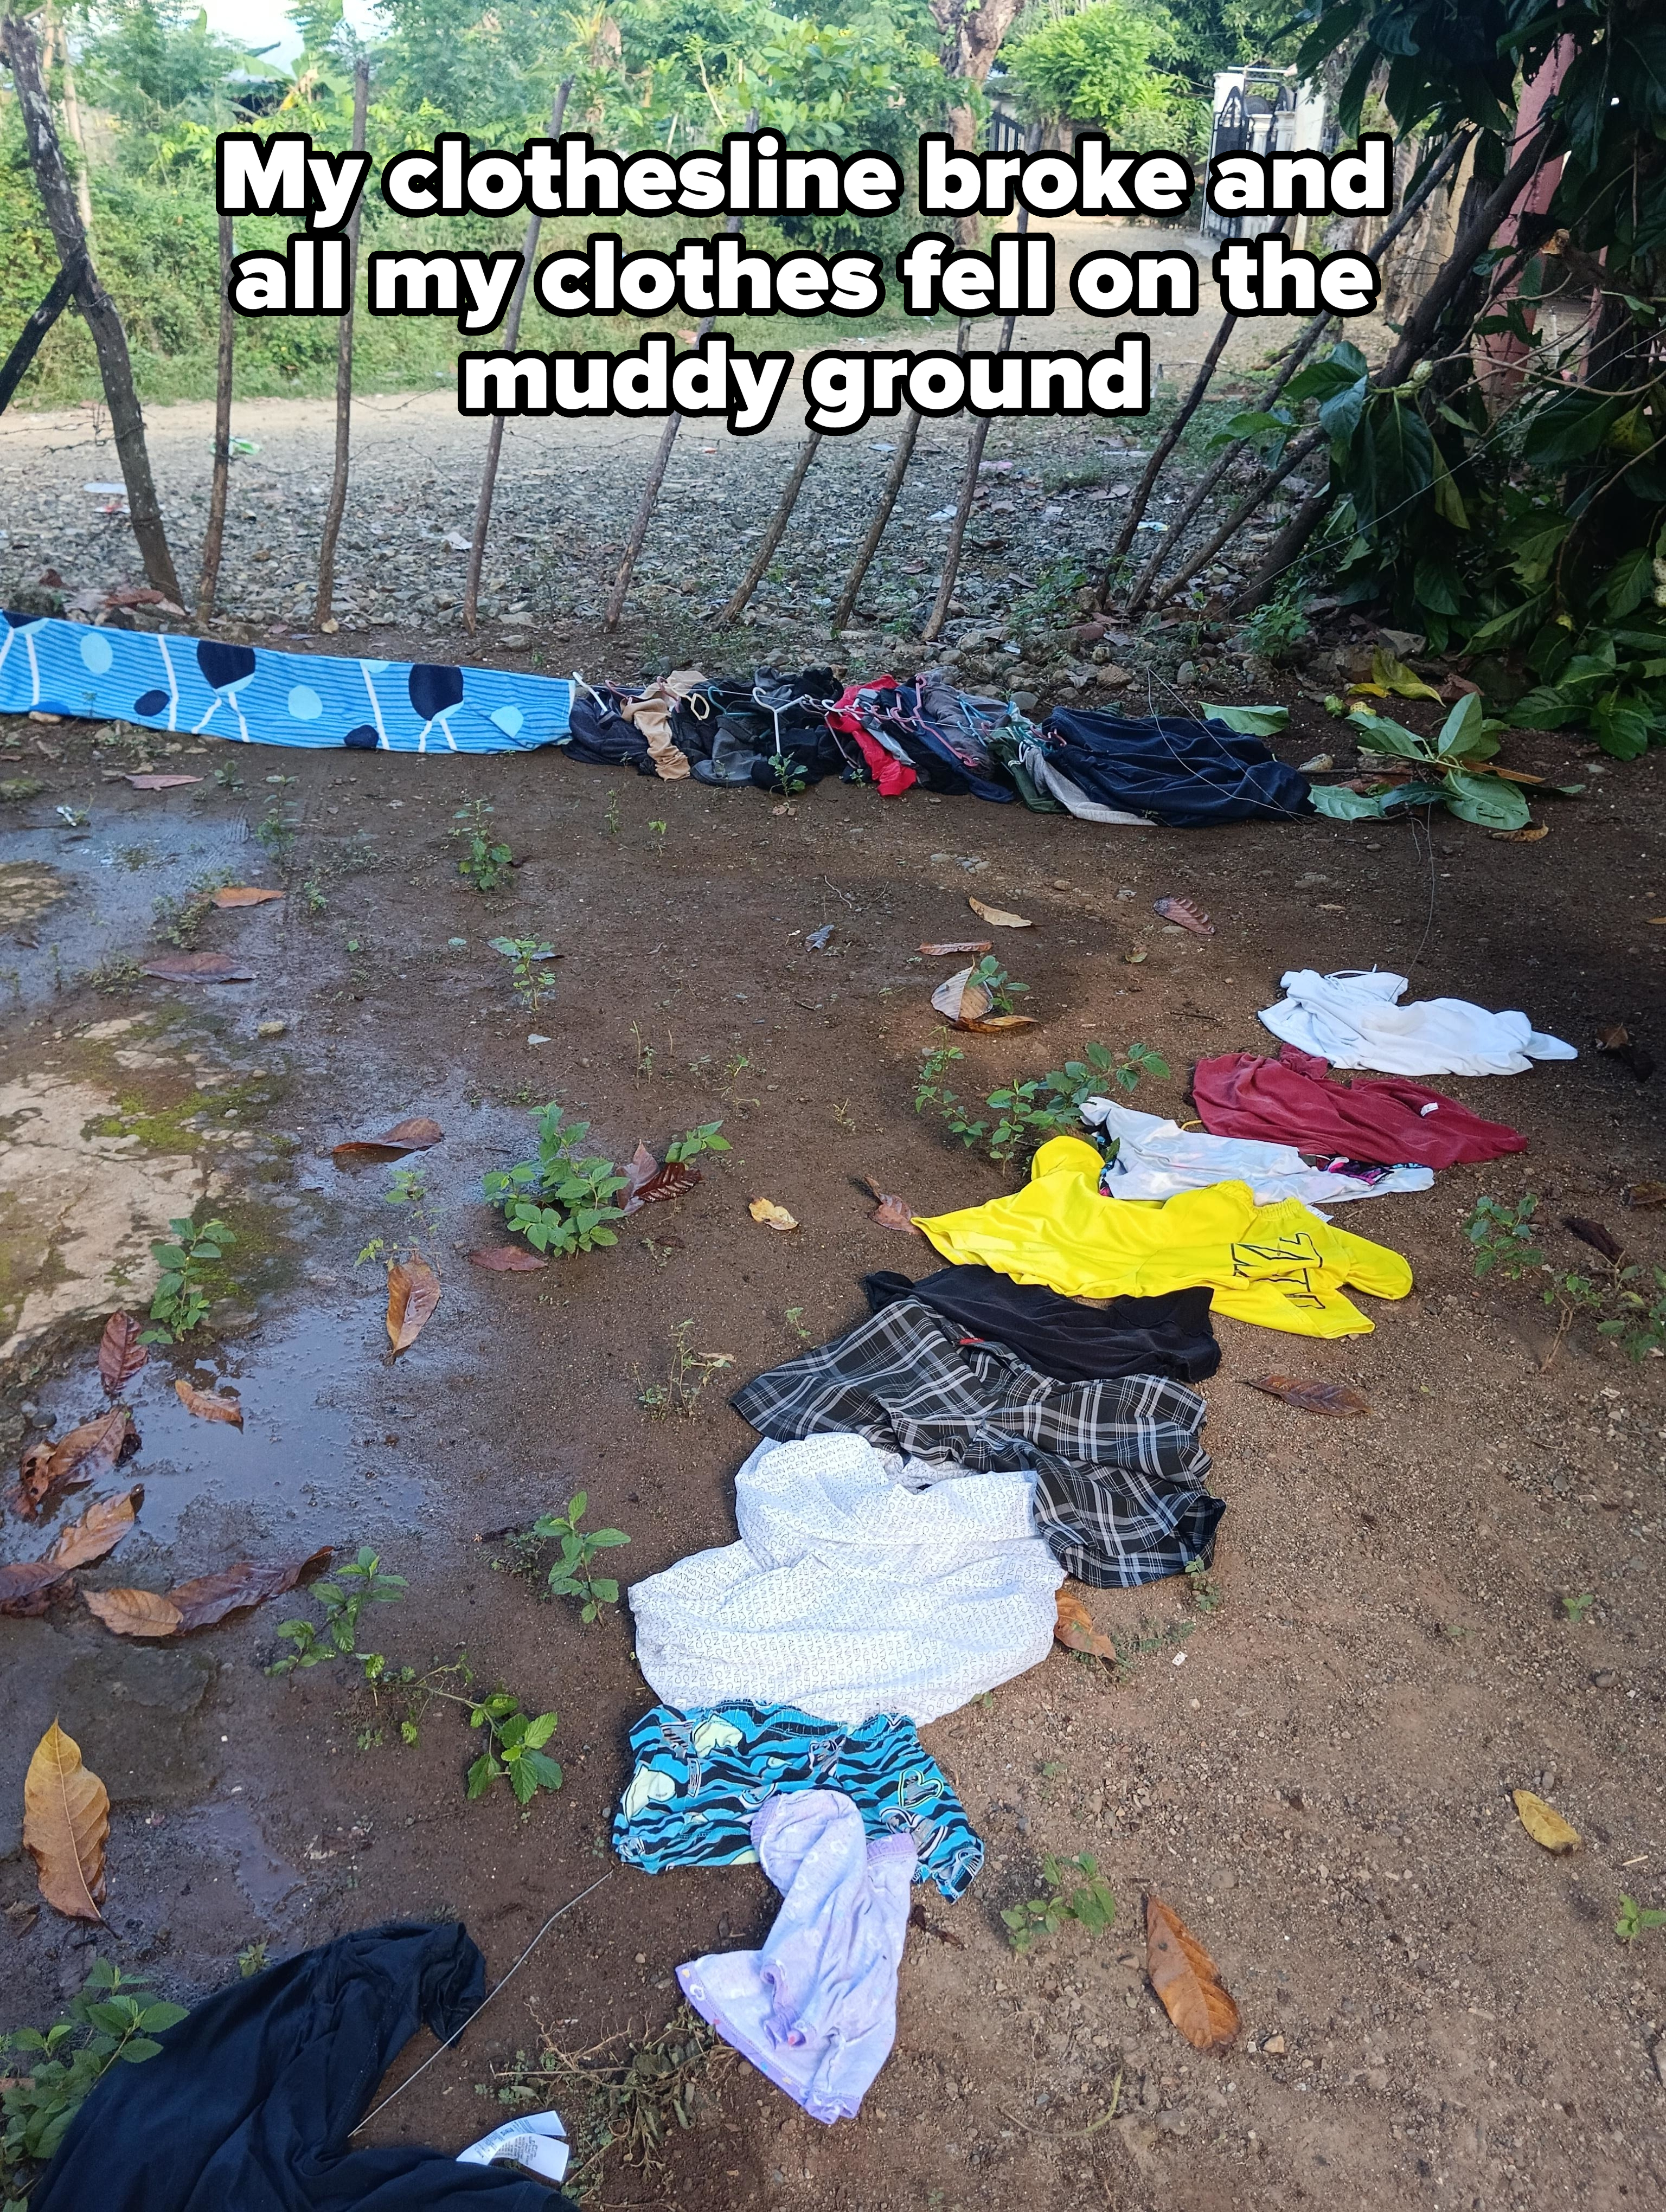 Laundry all over the ground